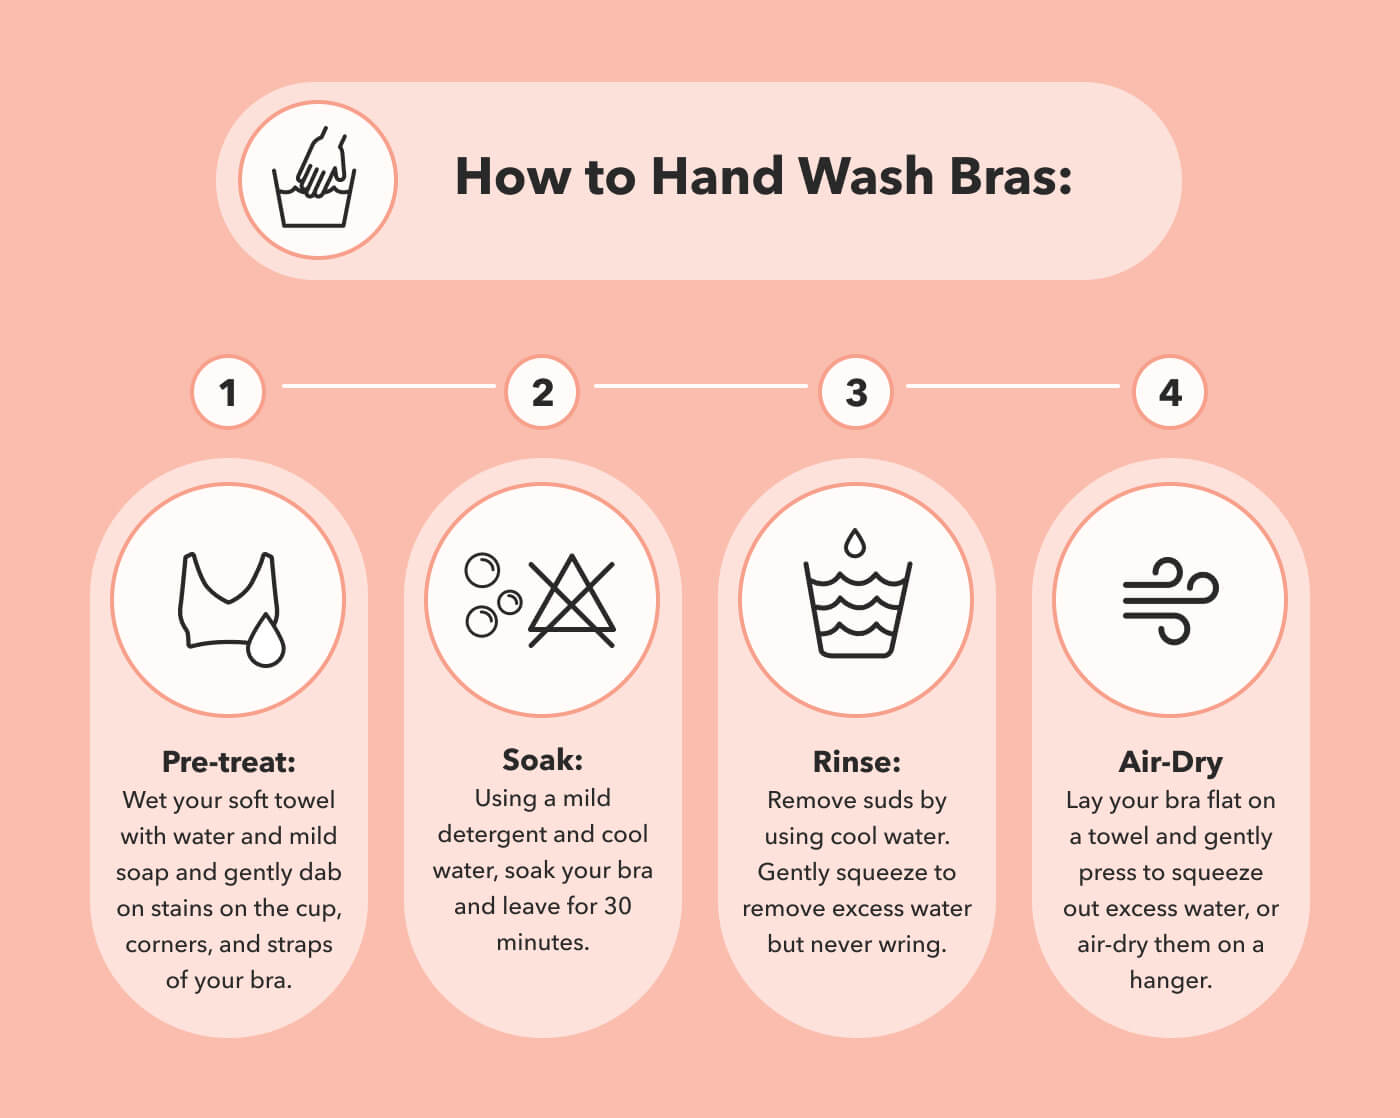 How to Wash Your Bras by Hand or Machine